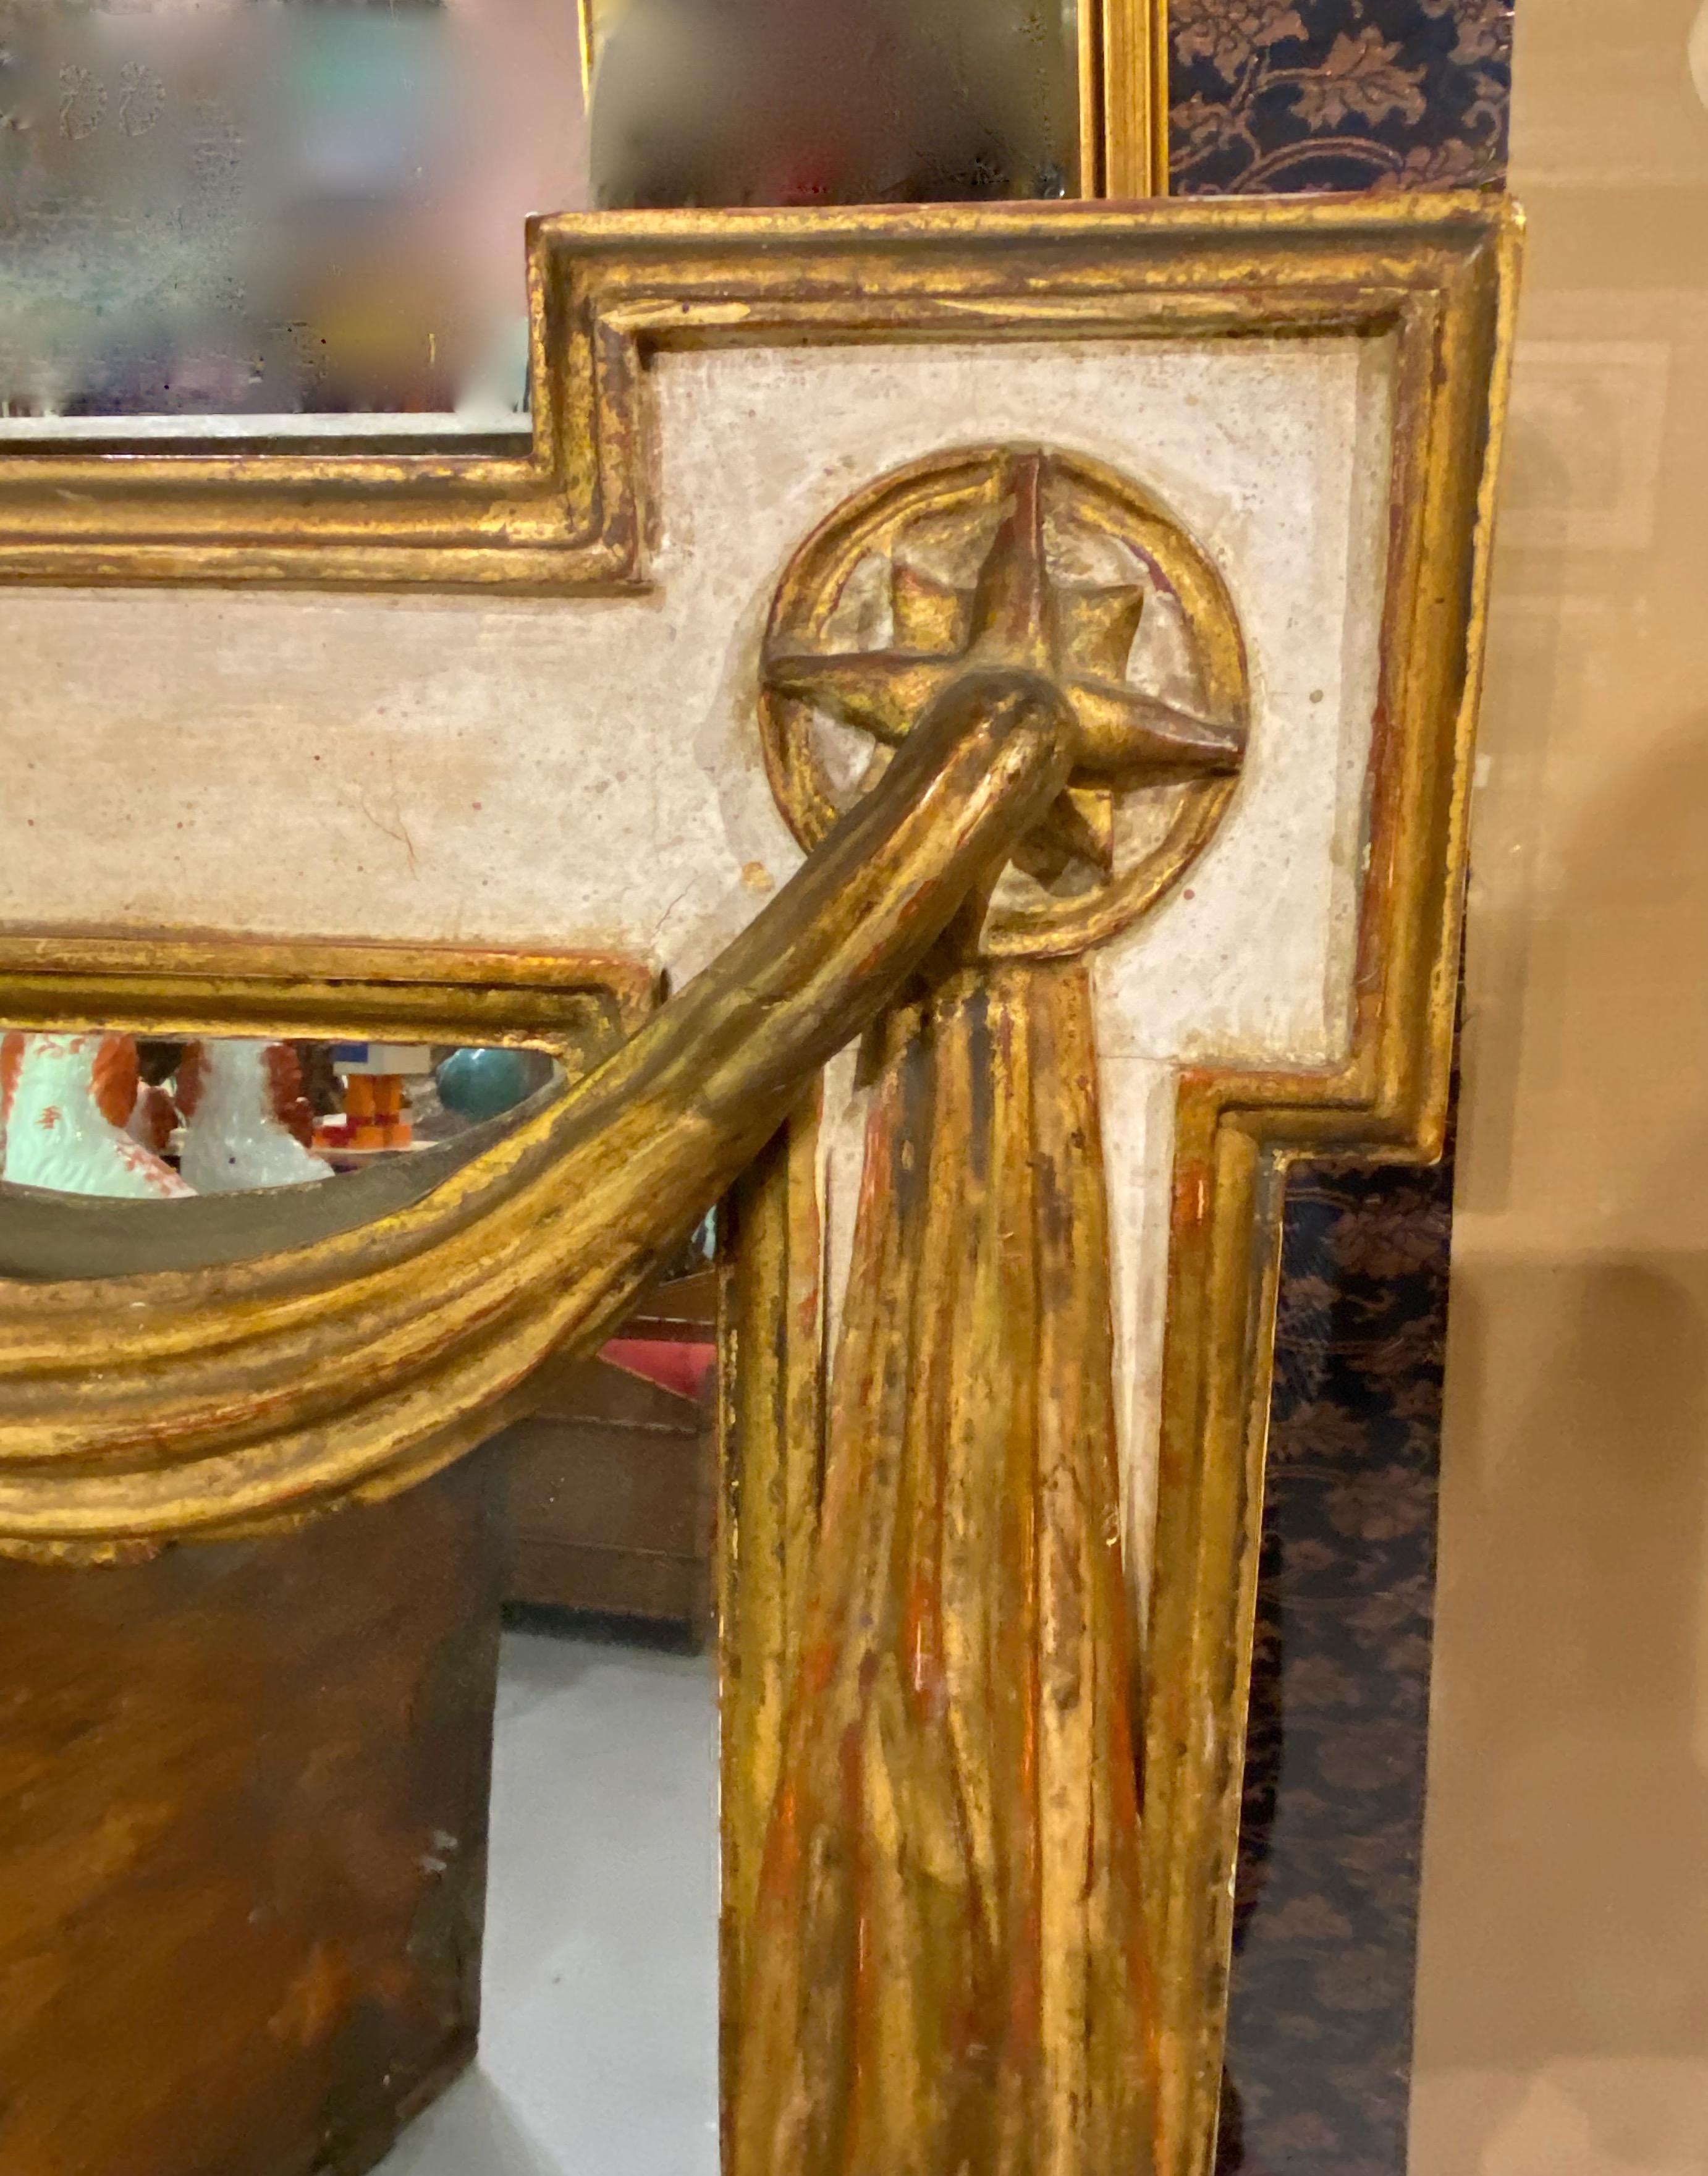 This is an impressive late 20th century mirror in the Venetian style. The mirror features a large carved and gold leafed center shell surrounded by neoclassical style drapery and gold leafed rosettes. All elements of the mirror are in very good